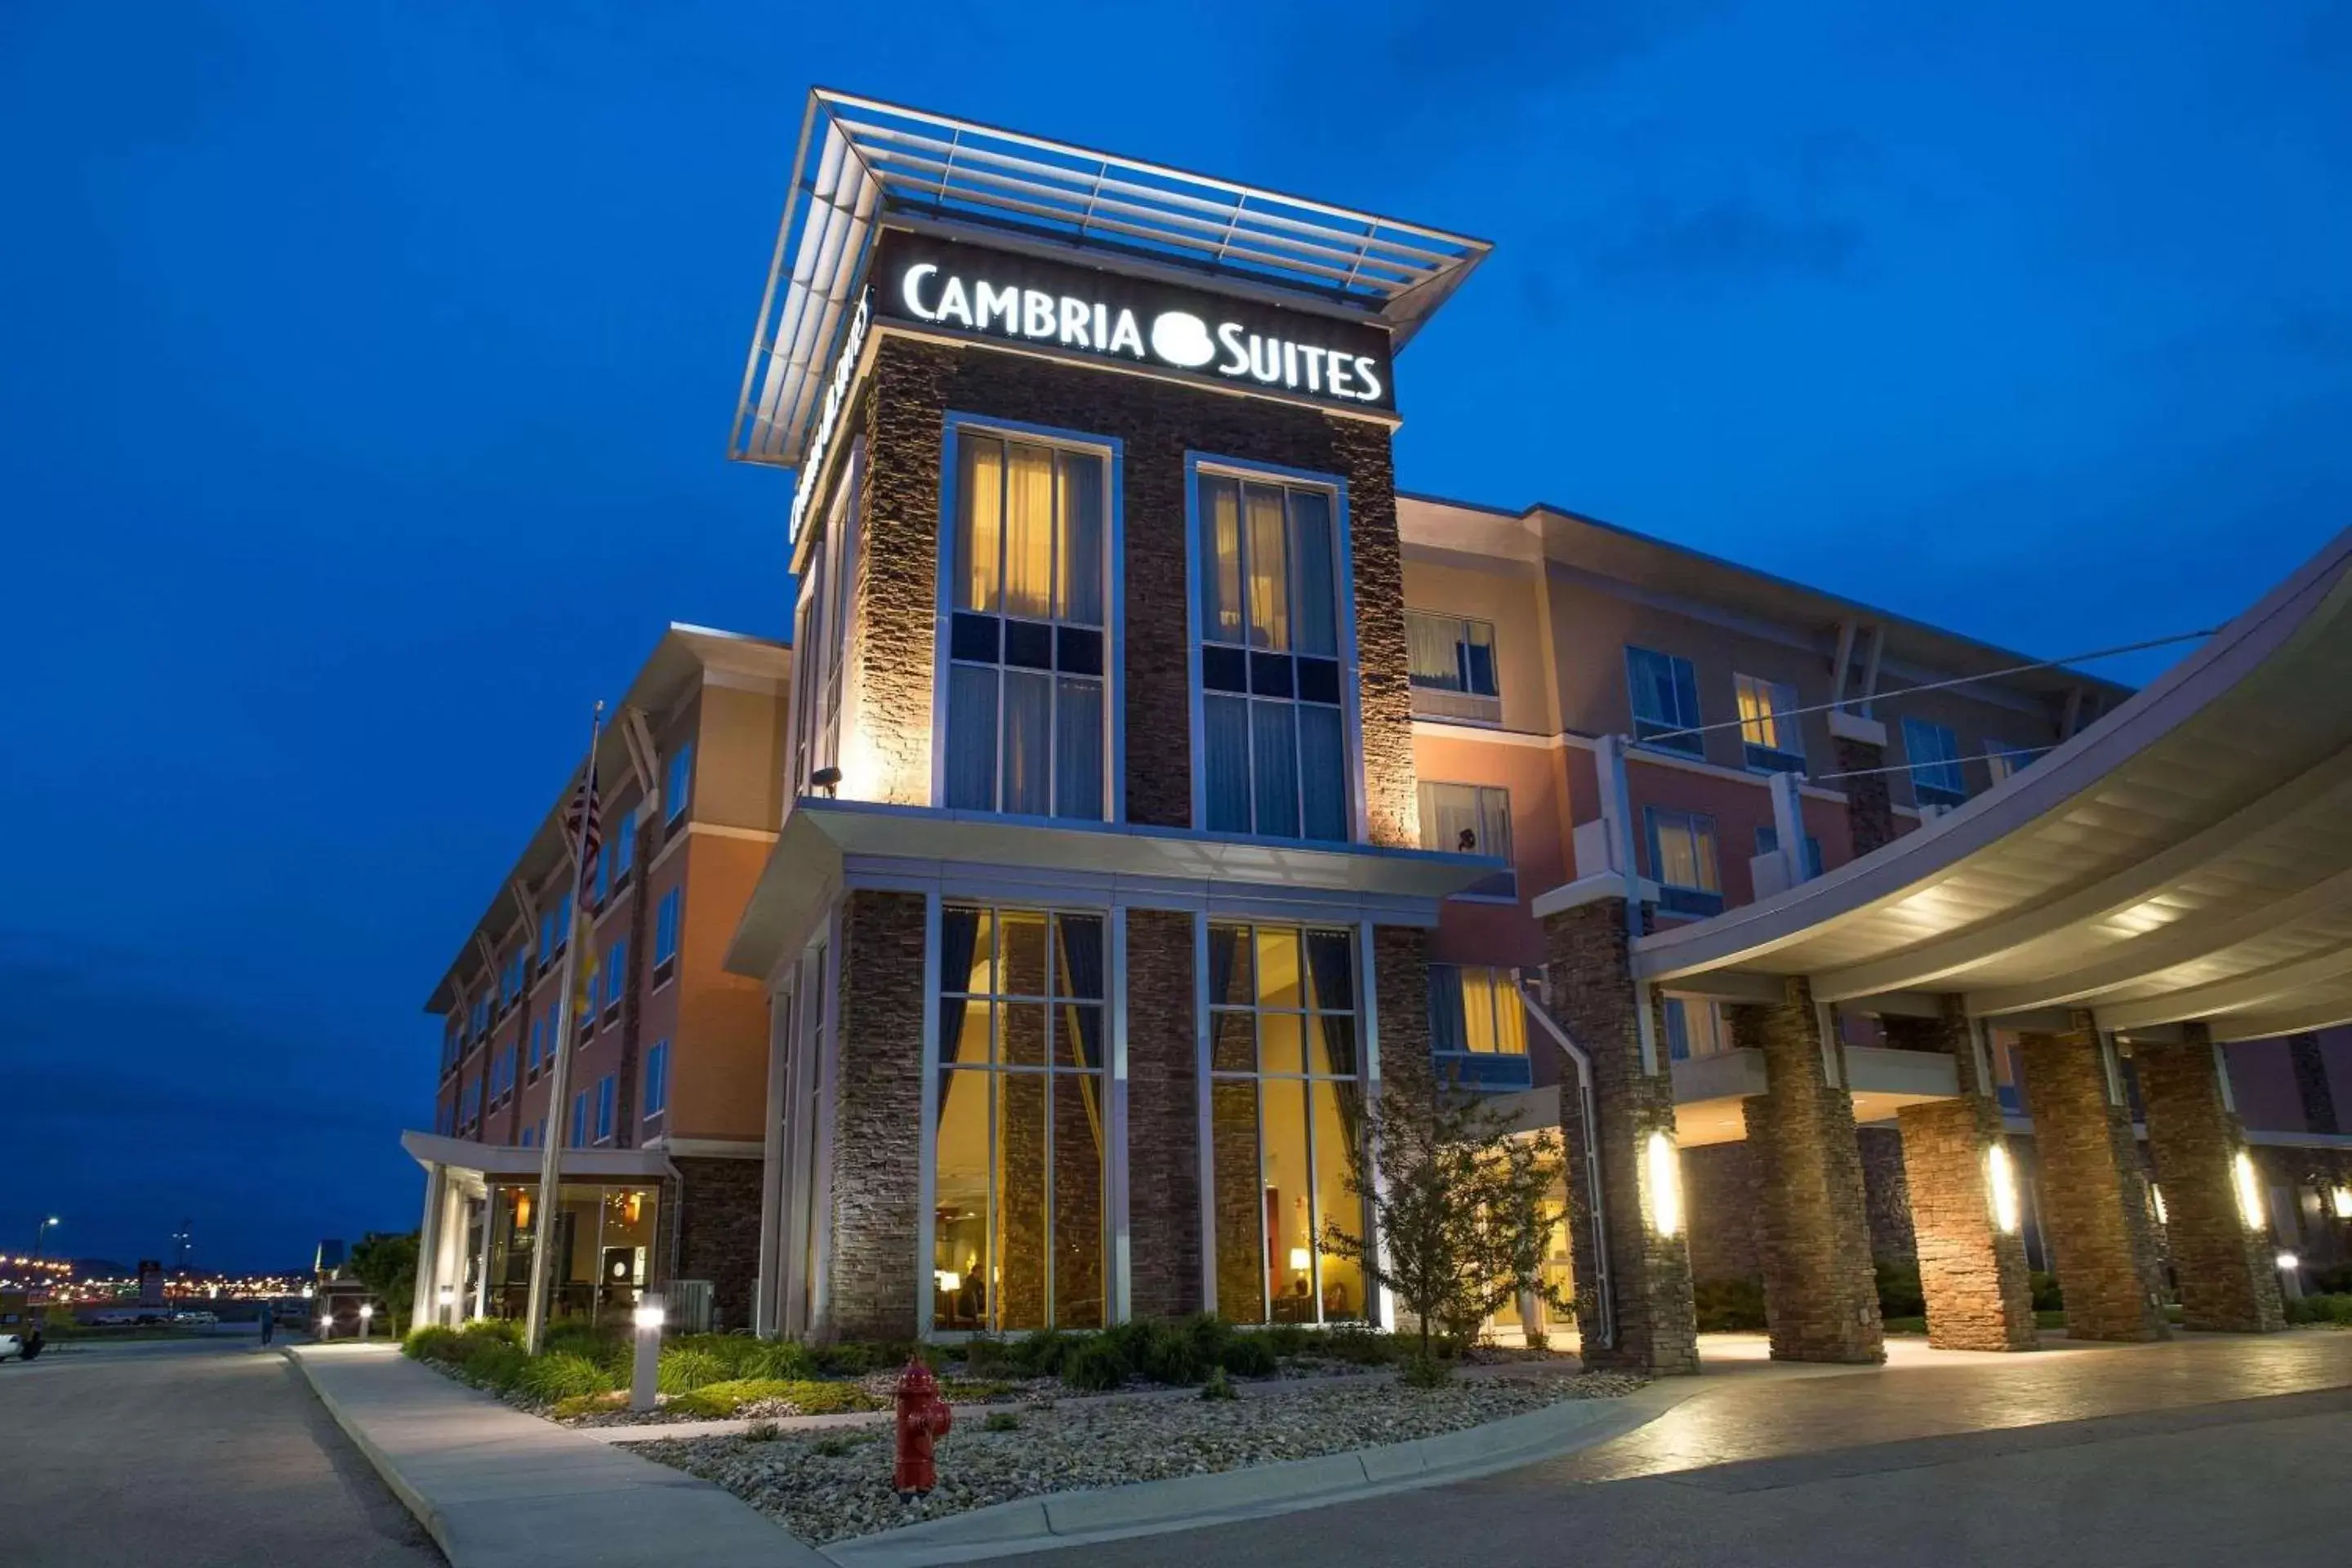 Property Building in Cambria Hotel Rapid City near Mount Rushmore